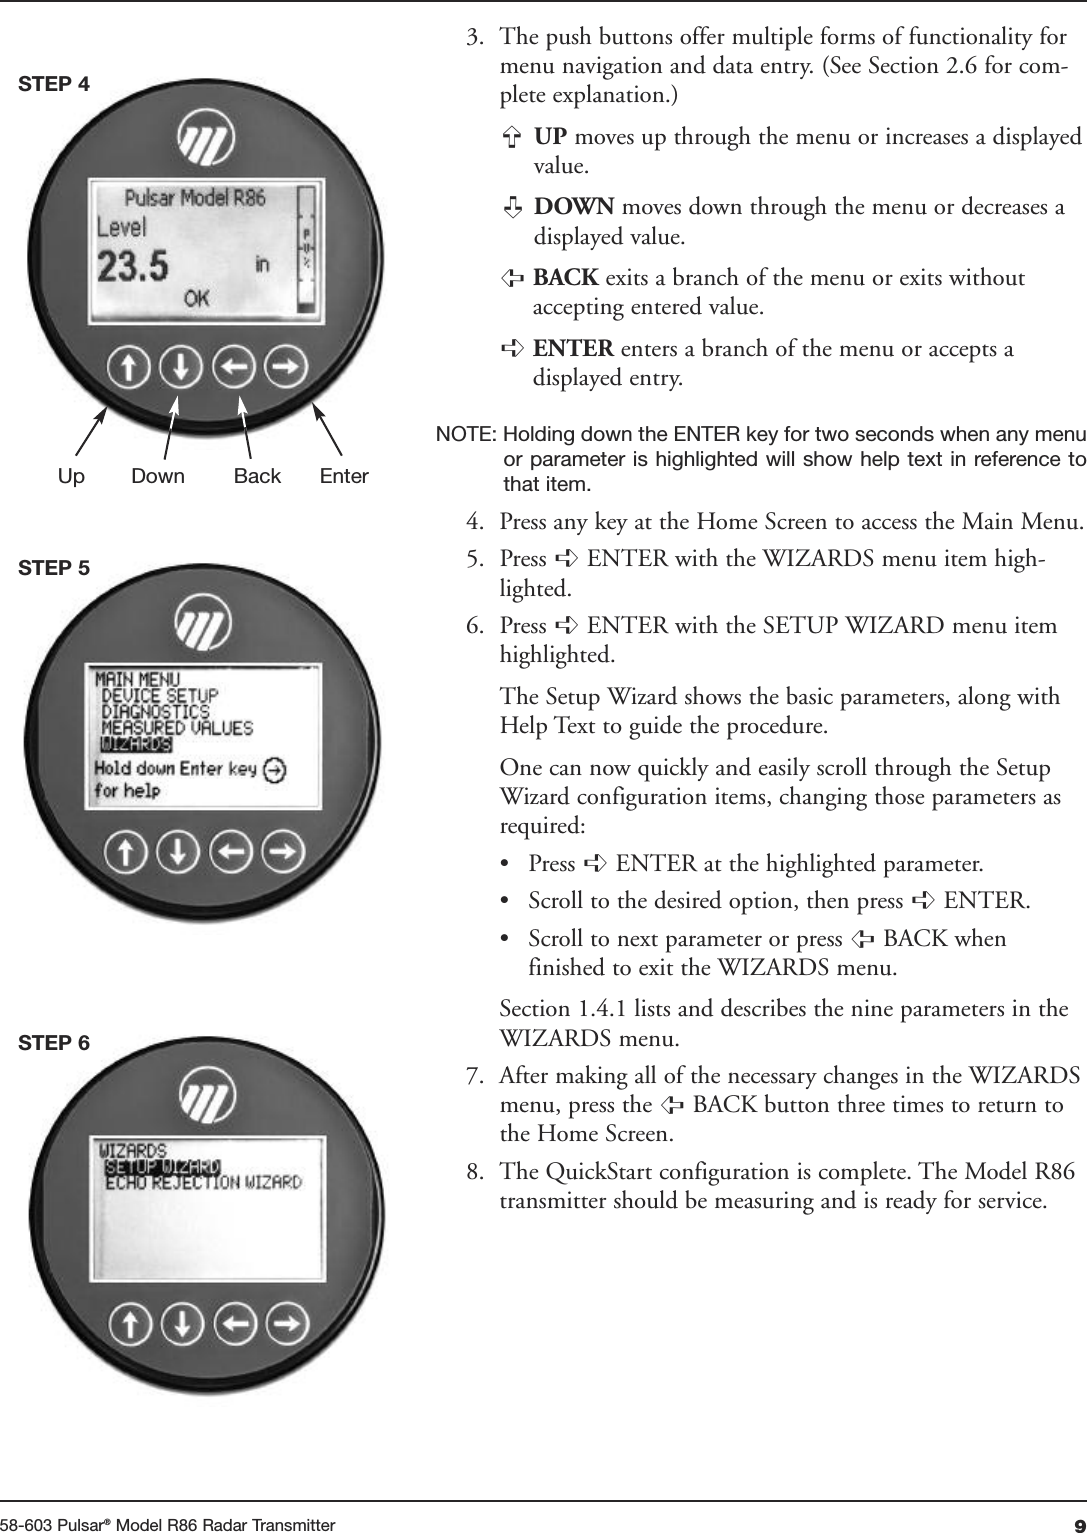 958-603 Pulsar®Model R86 Radar Transmitter3. The push buttons offer multiple forms of functionality formenu navigation and data entry. (See Section 2.6 for com-plete explanation.)UP moves up through the menu or increases a displayedvalue.DOWN moves down through the menu or decreases adisplayed value.BACK exits a branch of the menu or exits withoutaccepting entered value.ENTER enters a branch of the menu or accepts adisplayed entry.NOTE: Holding down the ENTER key for two seconds when any menuor parameter is highlighted will show help text in reference tothat item.4. Press any key at the Home Screen to access the Main Menu.5. Press  ENTER with the WIZARDS menu item high-lighted.6. Press  ENTER with the SETUP WIZARD menu itemhighlighted.The Setup Wizard shows the basic parameters, along withHelp Text to guide the procedure.One can now quickly and easily scroll through the SetupWizard configuration items, changing those parameters asrequired:• Press  ENTER at the highlighted parameter.• Scroll to the desired option, then press  ENTER.• Scroll to next parameter or press  BACK when finished to exit the WIZARDS menu.Section 1.4.1 lists and describes the nine parameters in theWIZARDS menu.7. After making all of the necessary changes in the WIZARDSmenu, press the  BACK button three    times to return tothe Home Screen.8. The QuickStart configuration is complete. The Model R86transmitter should be measuring and is ready for service.➪➪➪➪➪➪➪➪➪➪Up Down Back EnterSTEP 4STEP 5STEP 6